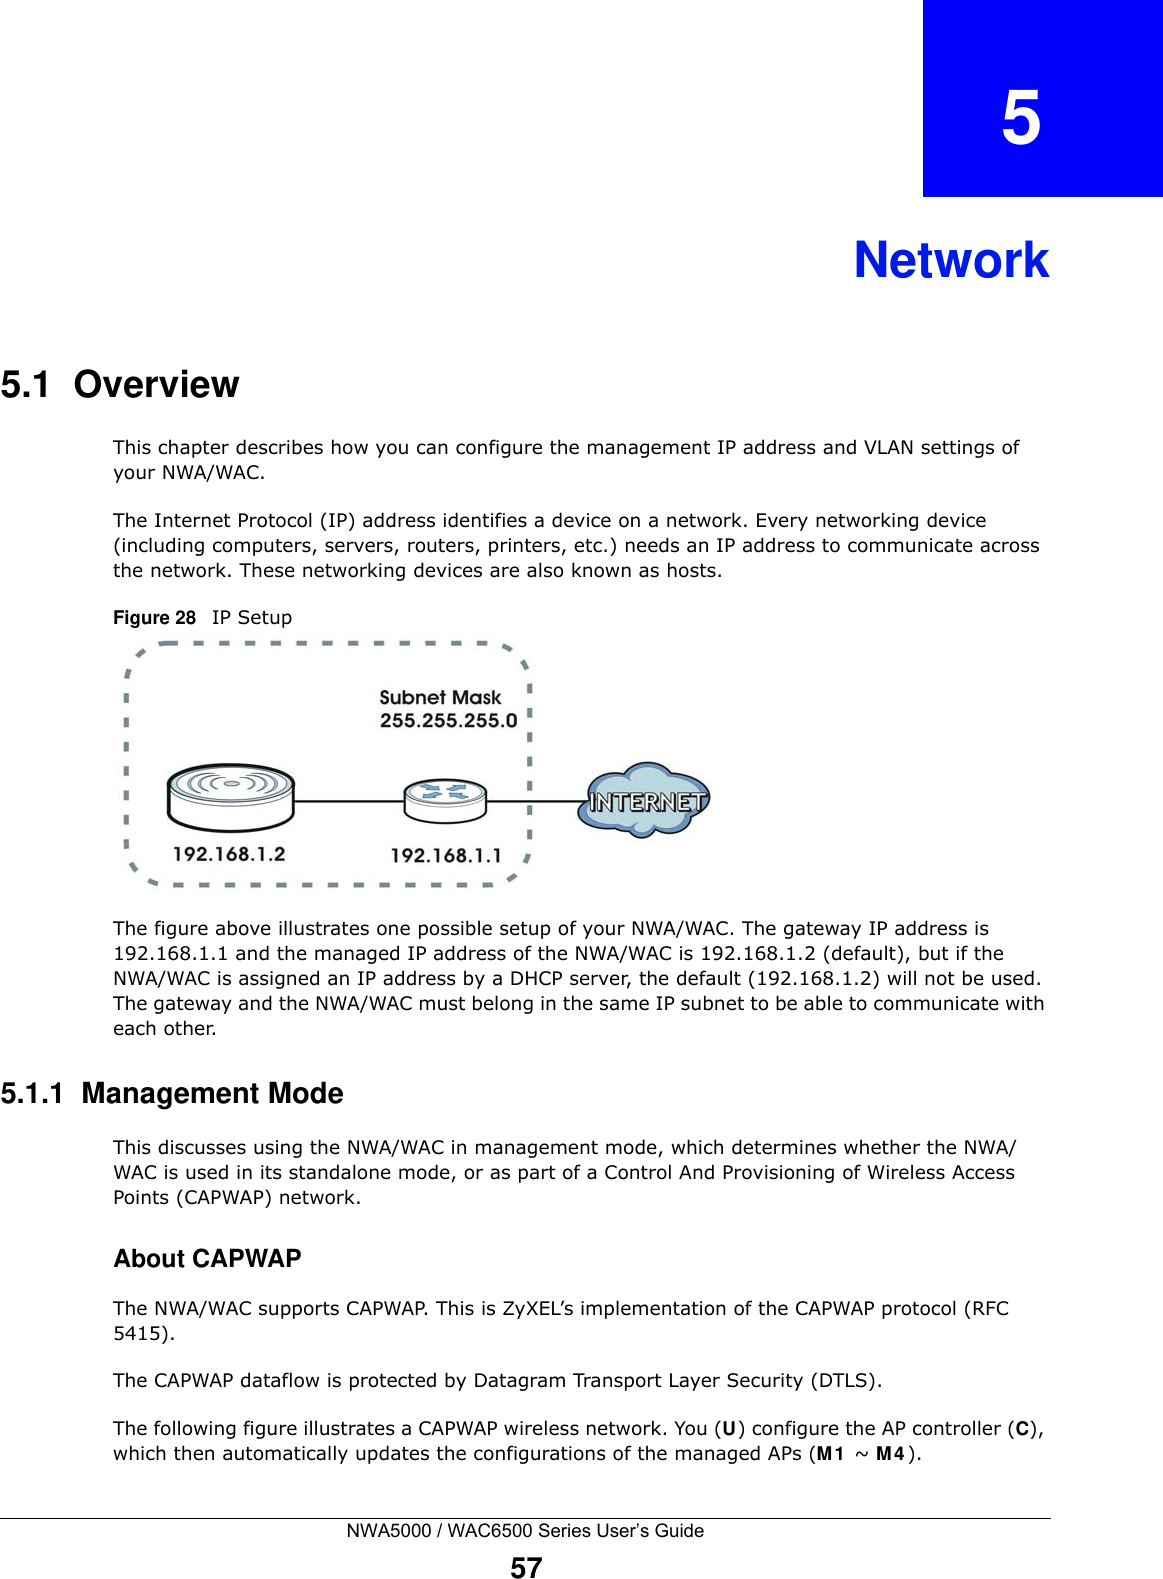 NWA5000 / WAC6500 Series User’s Guide57CHAPTER   5Network5.1  OverviewThis chapter describes how you can configure the management IP address and VLAN settings of your NWA/WAC.The Internet Protocol (IP) address identifies a device on a network. Every networking device (including computers, servers, routers, printers, etc.) needs an IP address to communicate across the network. These networking devices are also known as hosts.Figure 28   IP SetupThe figure above illustrates one possible setup of your NWA/WAC. The gateway IP address is 192.168.1.1 and the managed IP address of the NWA/WAC is 192.168.1.2 (default), but if the NWA/WAC is assigned an IP address by a DHCP server, the default (192.168.1.2) will not be used. The gateway and the NWA/WAC must belong in the same IP subnet to be able to communicate with each other.5.1.1  Management ModeThis discusses using the NWA/WAC in management mode, which determines whether the NWA/WAC is used in its standalone mode, or as part of a Control And Provisioning of Wireless Access Points (CAPWAP) network. About CAPWAPThe NWA/WAC supports CAPWAP. This is ZyXEL’s implementation of the CAPWAP protocol (RFC 5415). The CAPWAP dataflow is protected by Datagram Transport Layer Security (DTLS).The following figure illustrates a CAPWAP wireless network. You (U) configure the AP controller (C), which then automatically updates the configurations of the managed APs (M1  ~ M 4 ). 